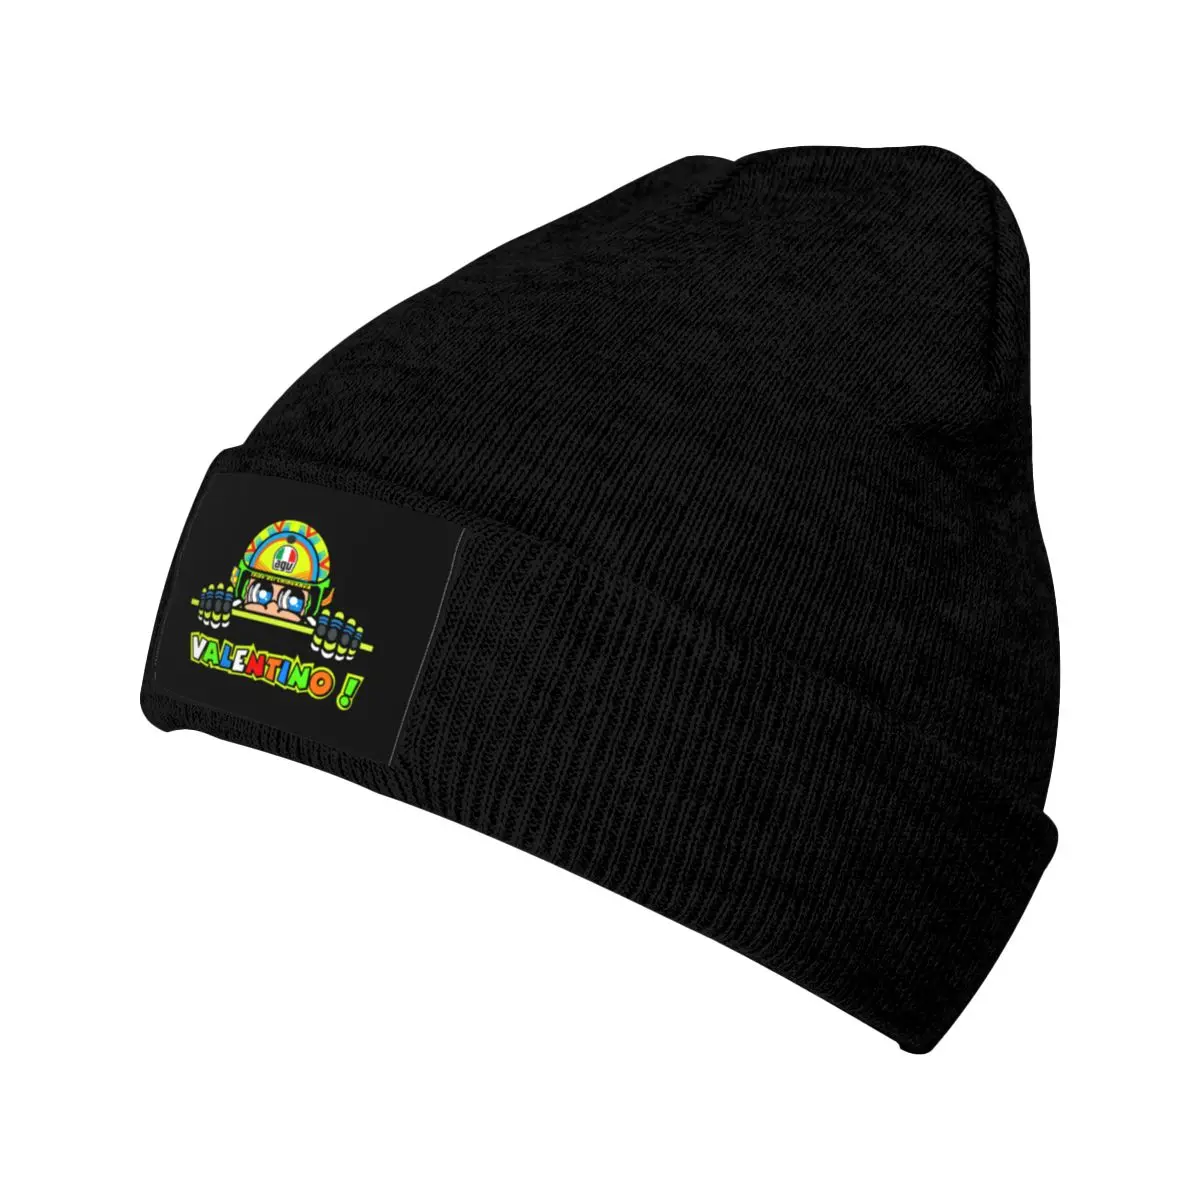 

Moto-Gp Rossi-Speed Racing Hats Autumn Winter Skullies Beanies Fashion Motocross Caps Female Male Knitted Hat